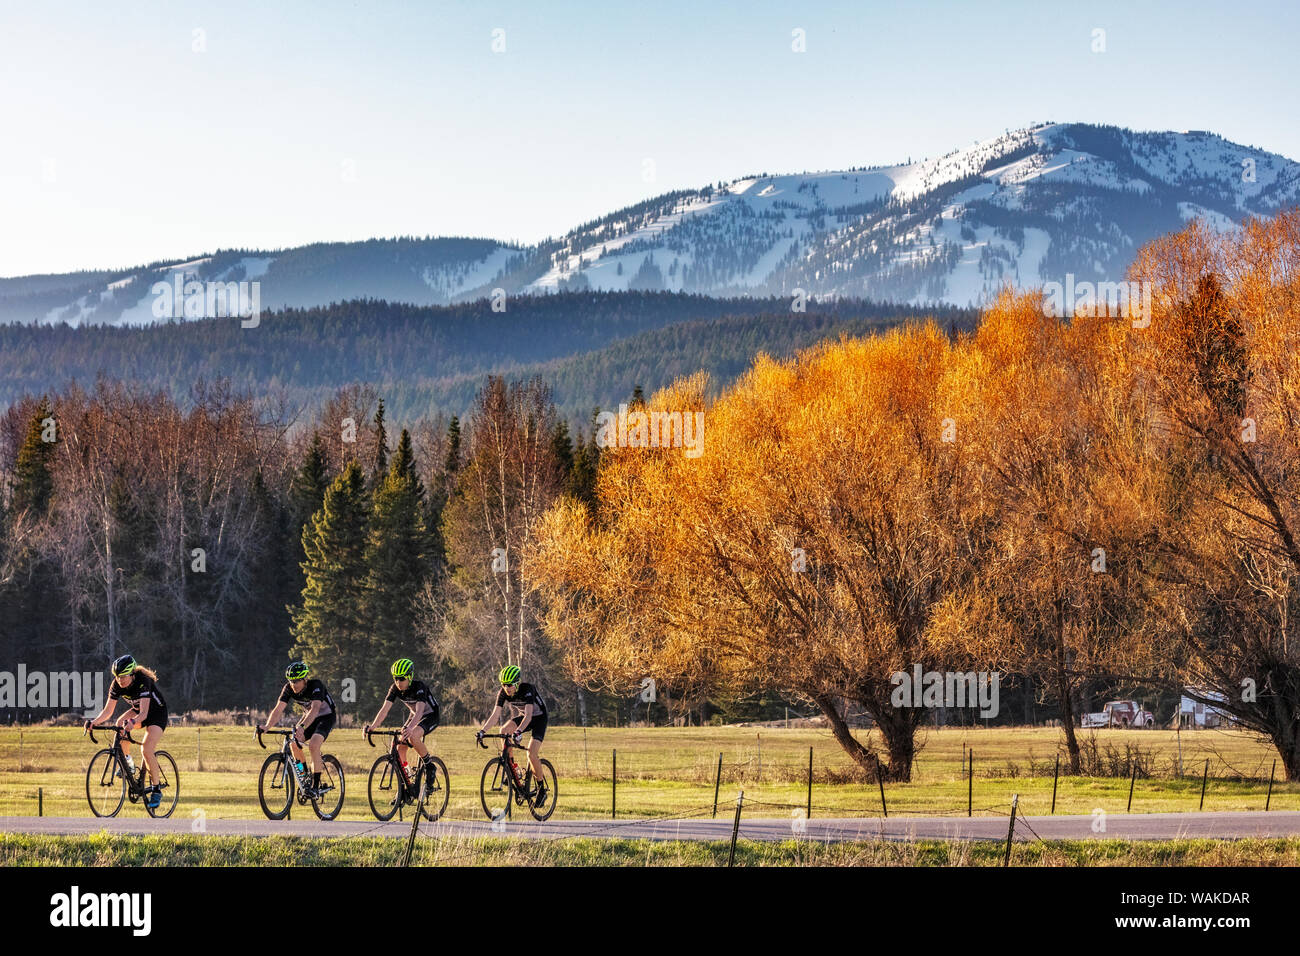 Family road bicycling on Haskill Basin Road with Big Mountain in the background in Whitefish, Montana, USA (MR) Stock Photo